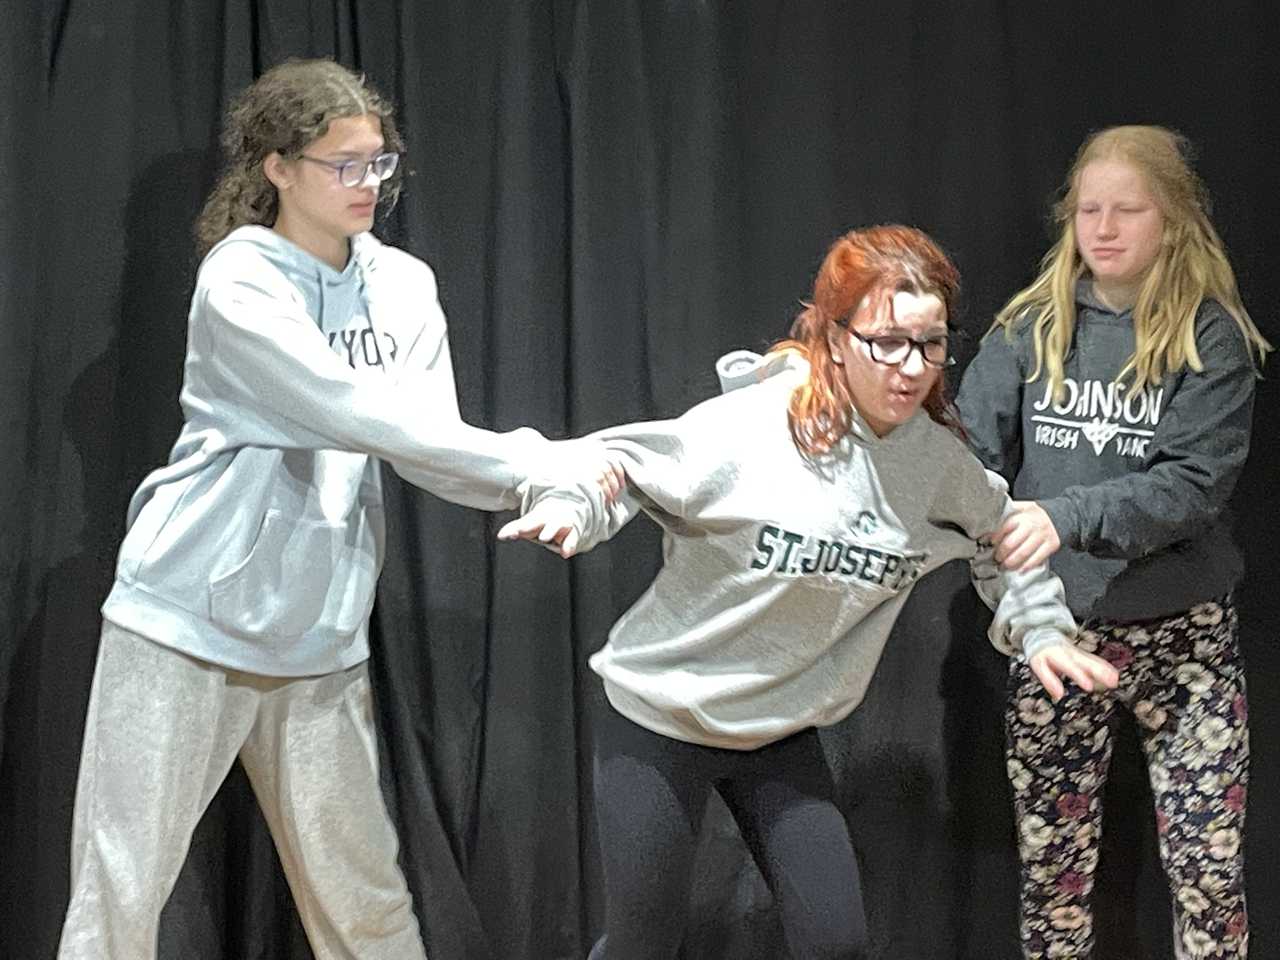 Acting Class for Teens working on a play